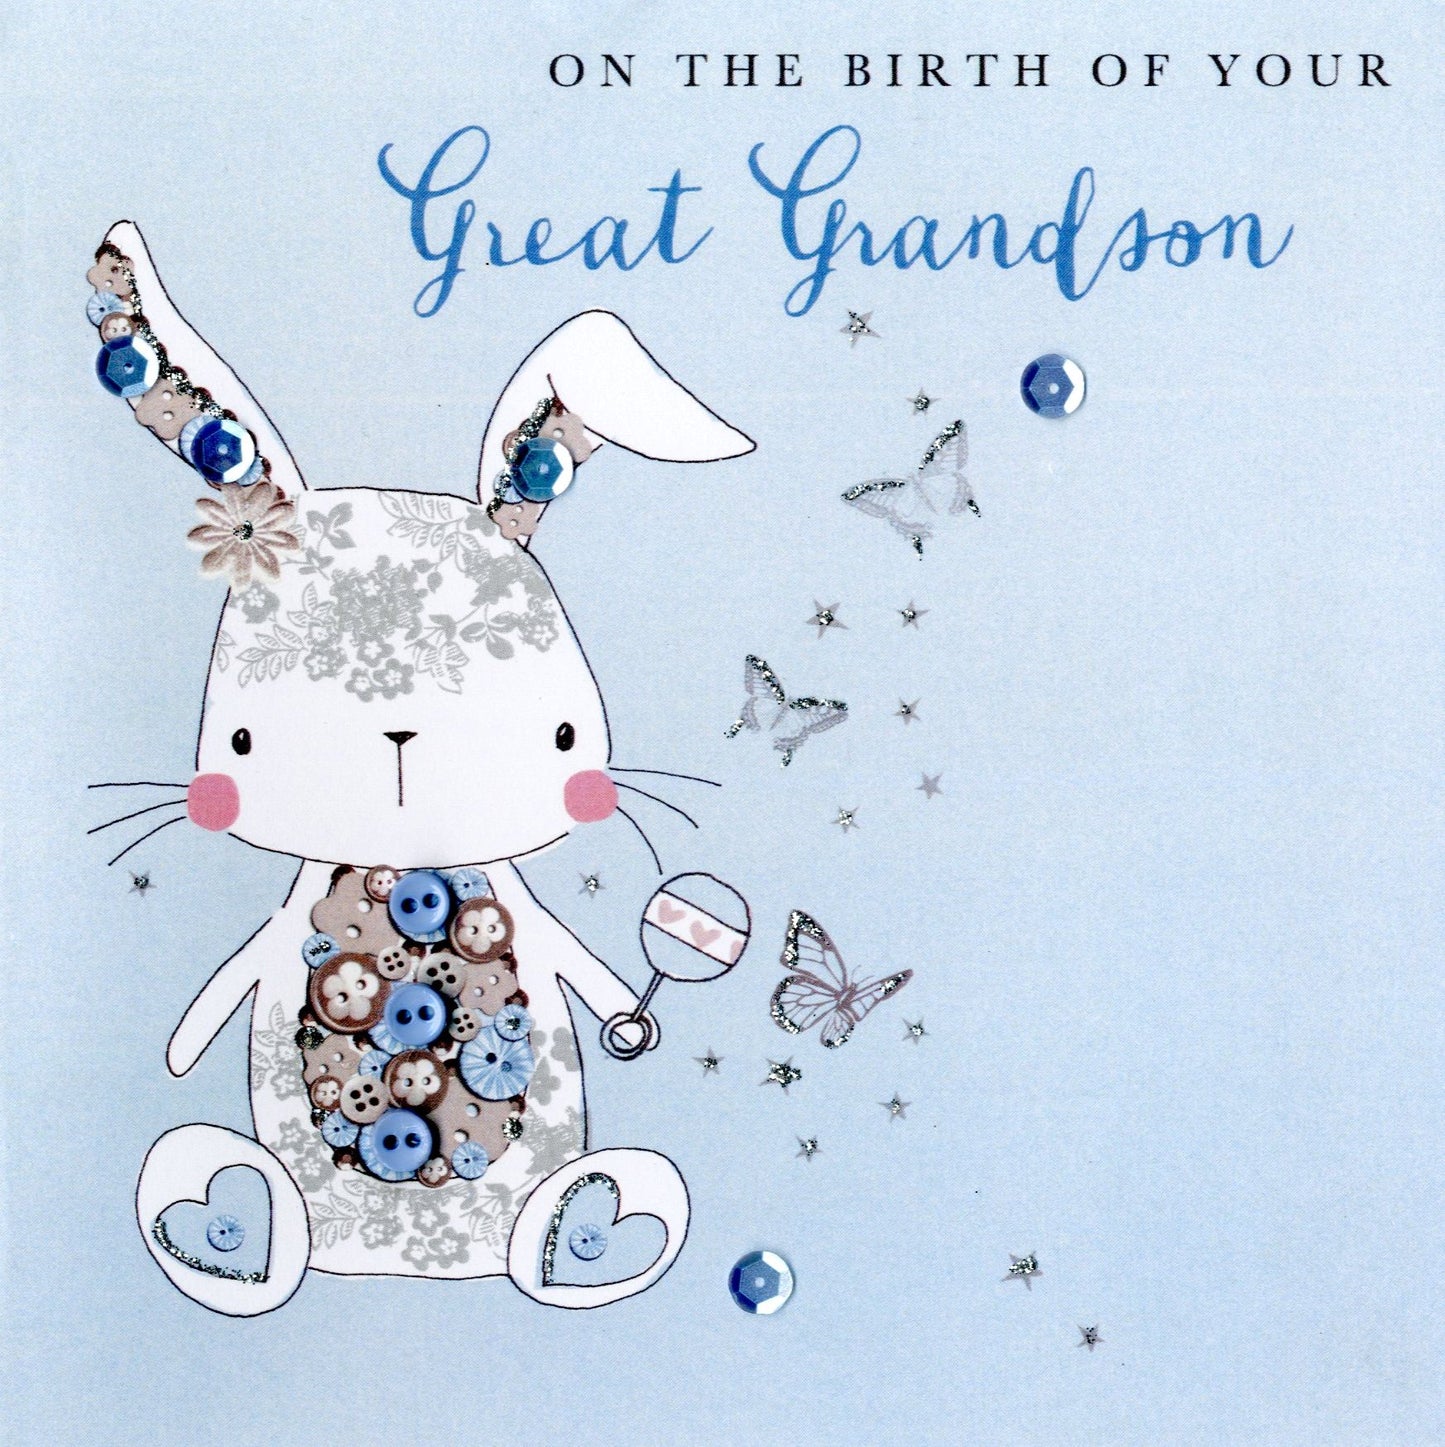 New Baby Great Grandson Buttoned Up Greeting Card